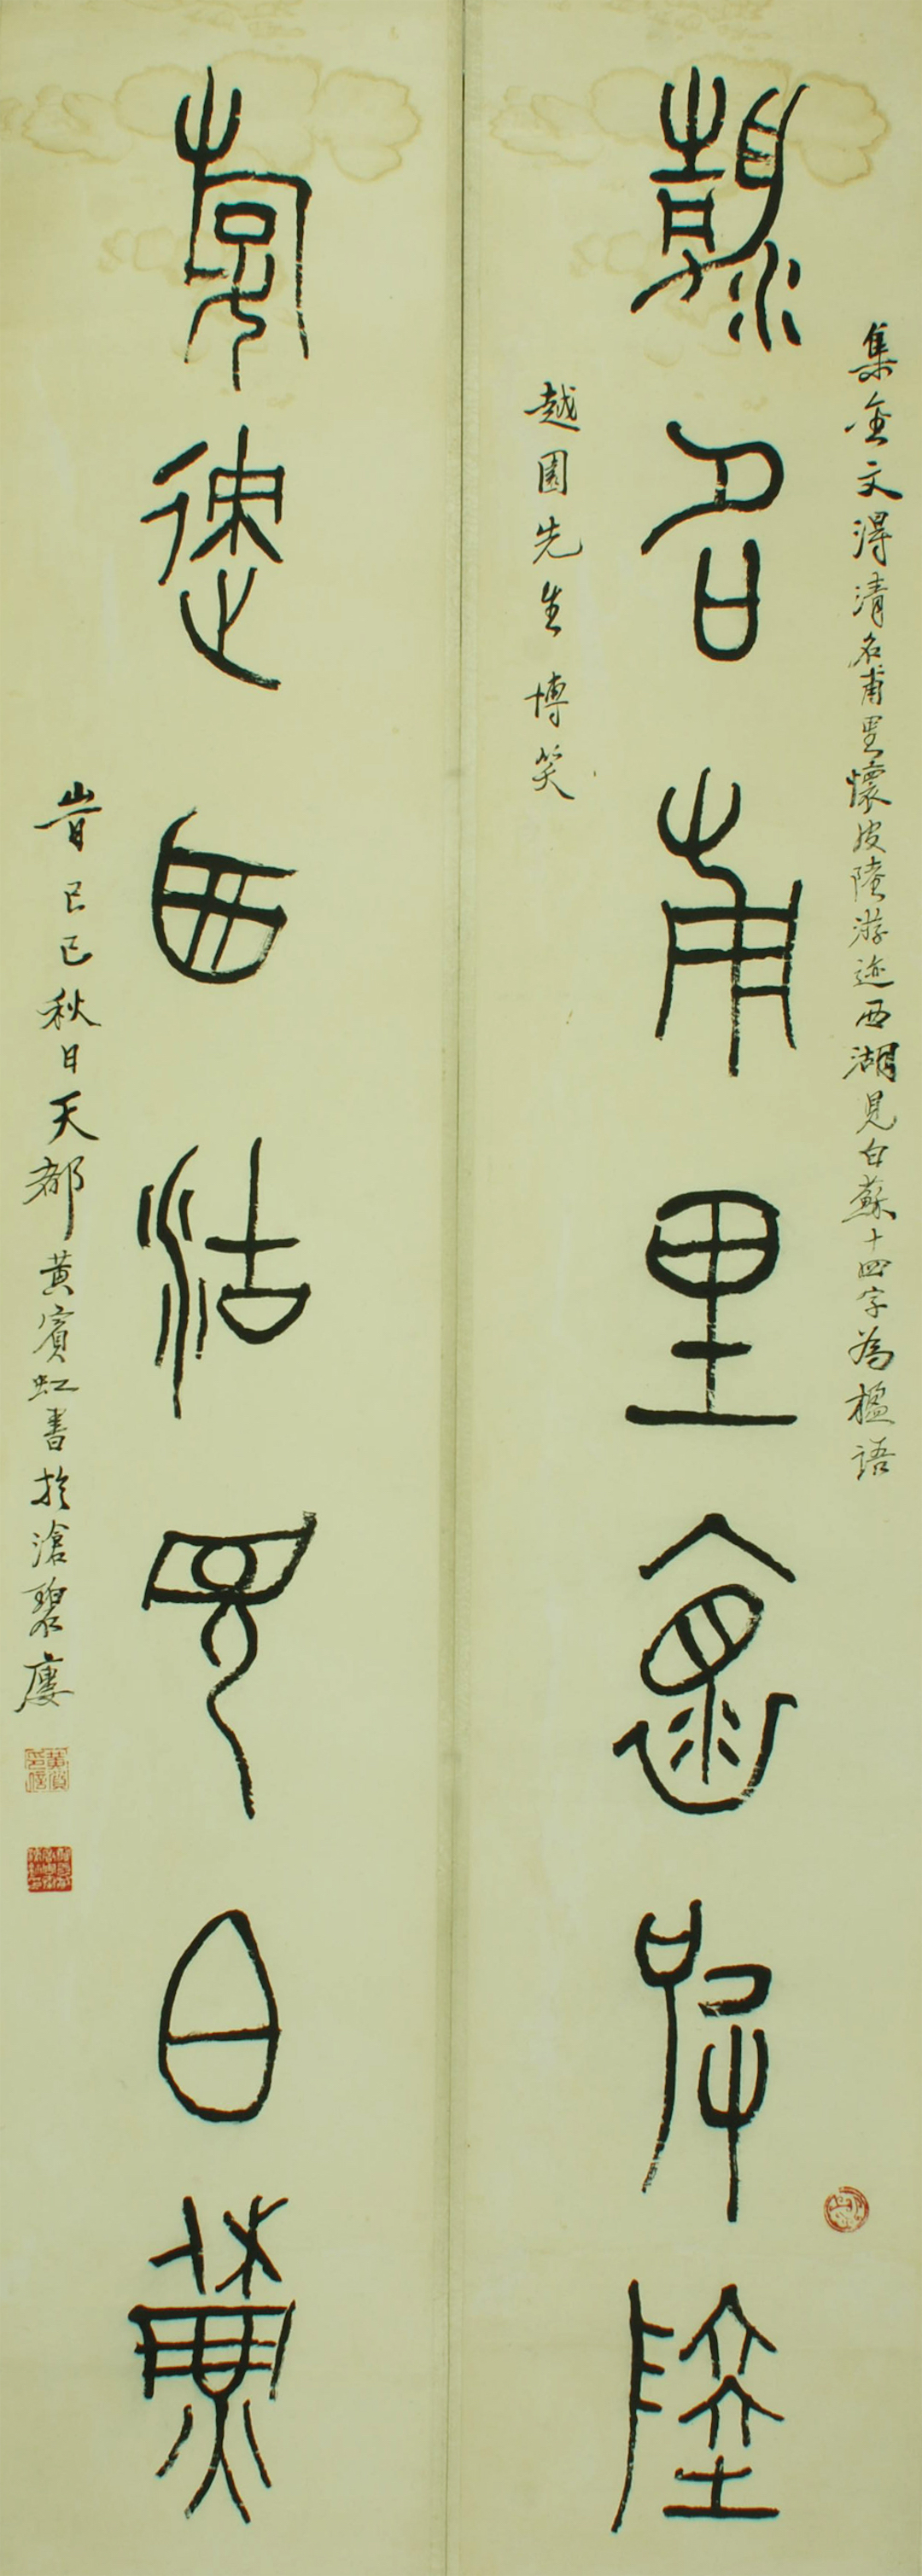 In 1929, Huang Binhong collected the seven-character couplet of the golden inscription "Traveling in the Qing Dynasty"